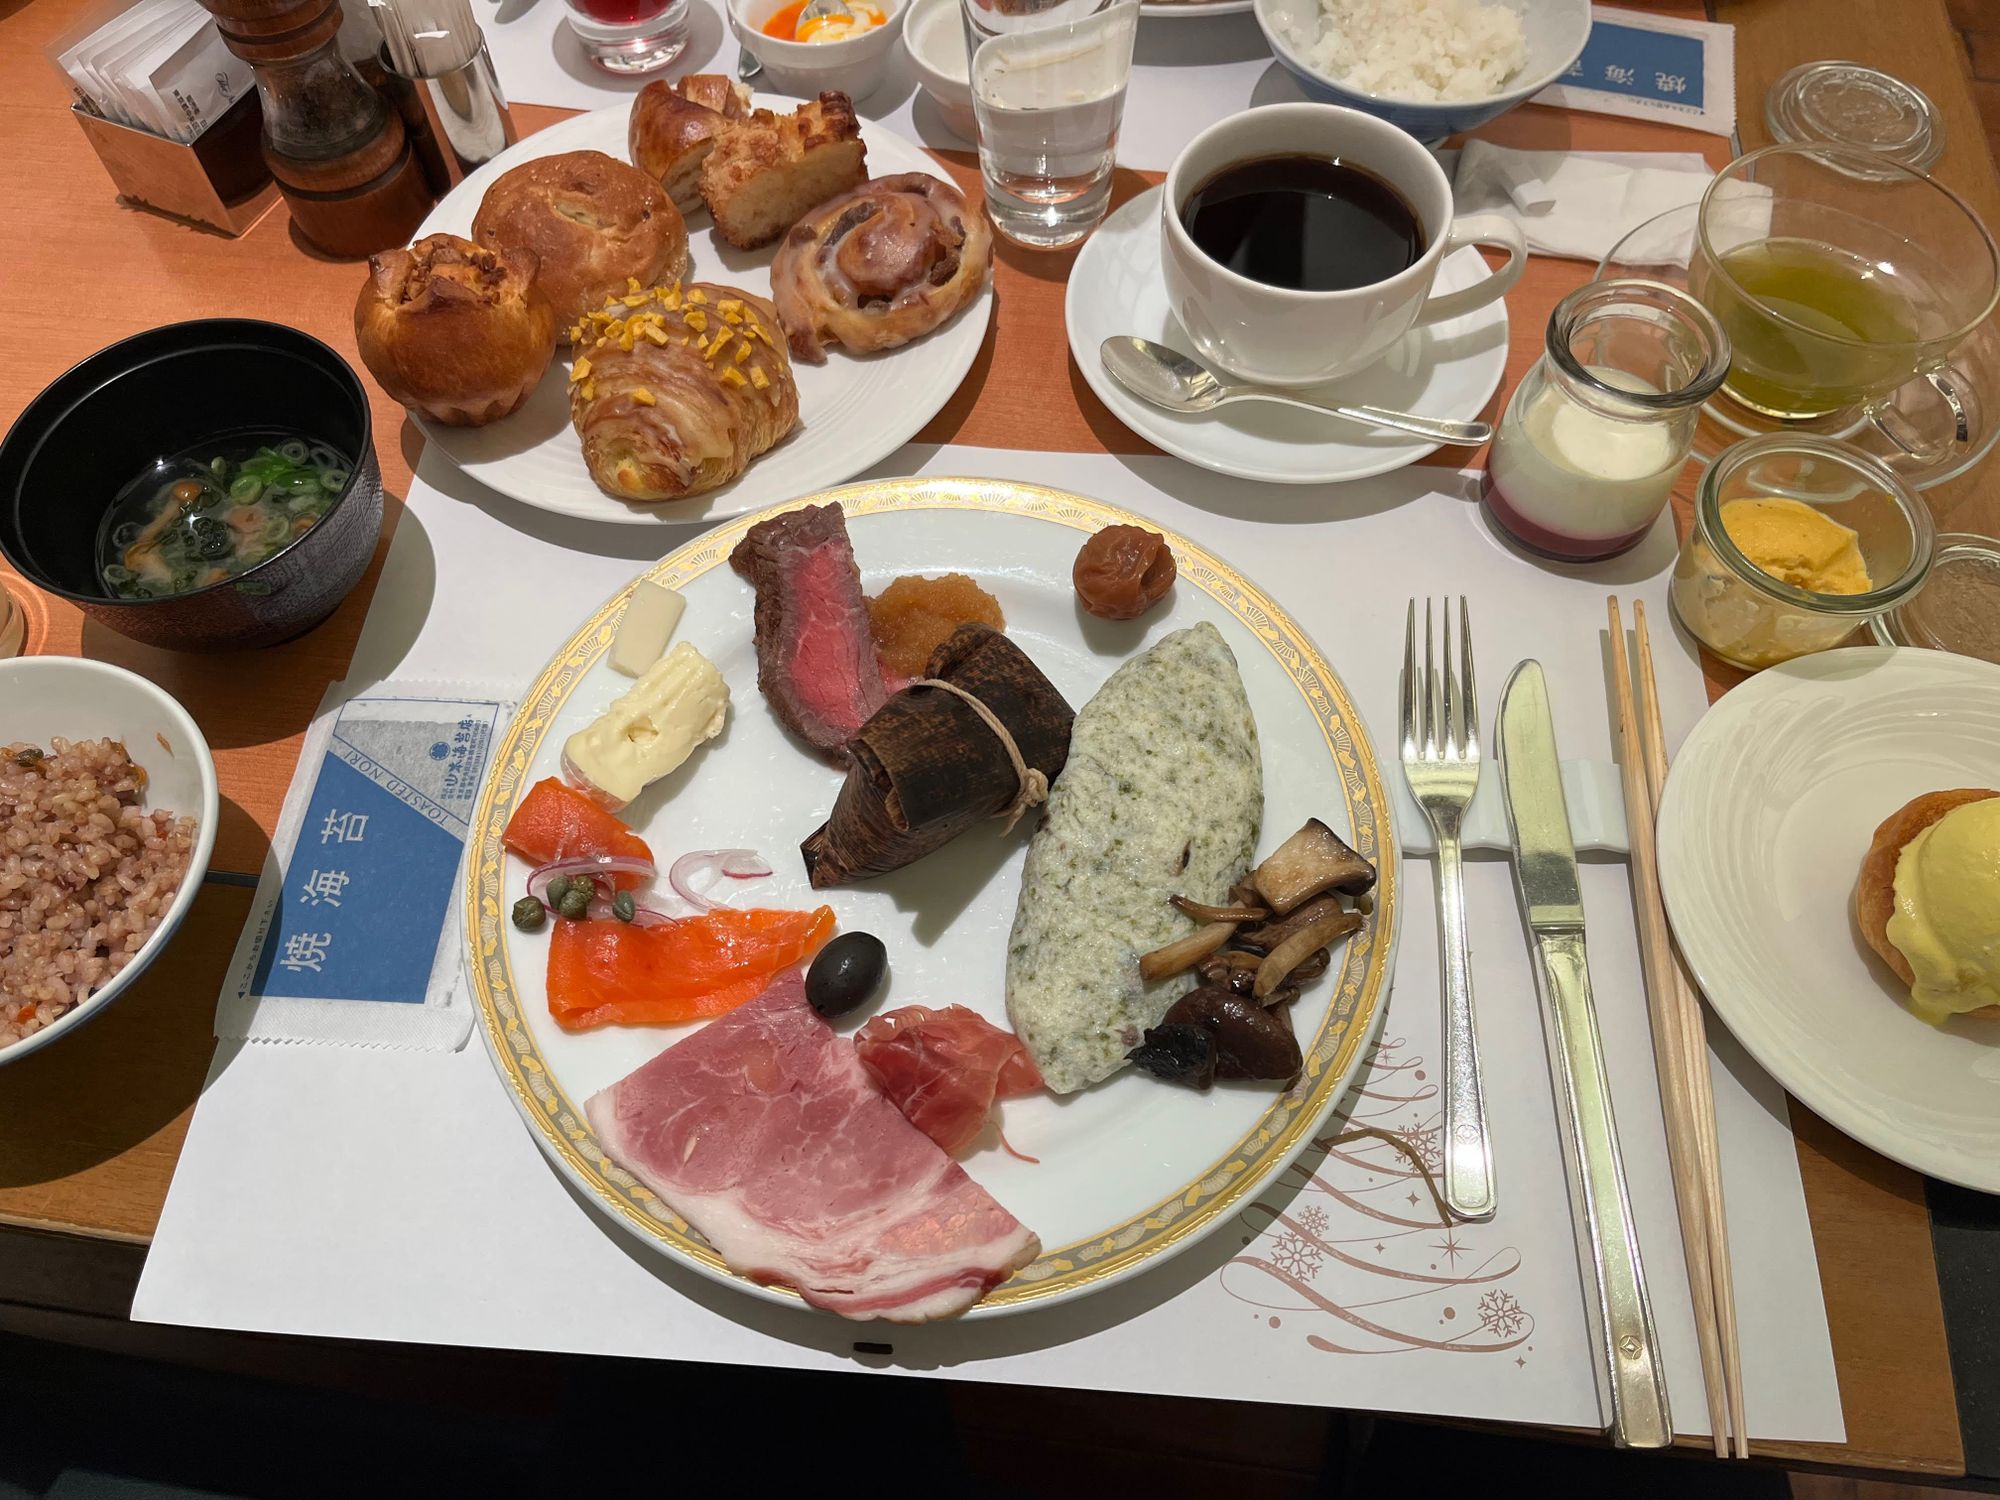 Breakfast Buffet in Japan with omlette and steak